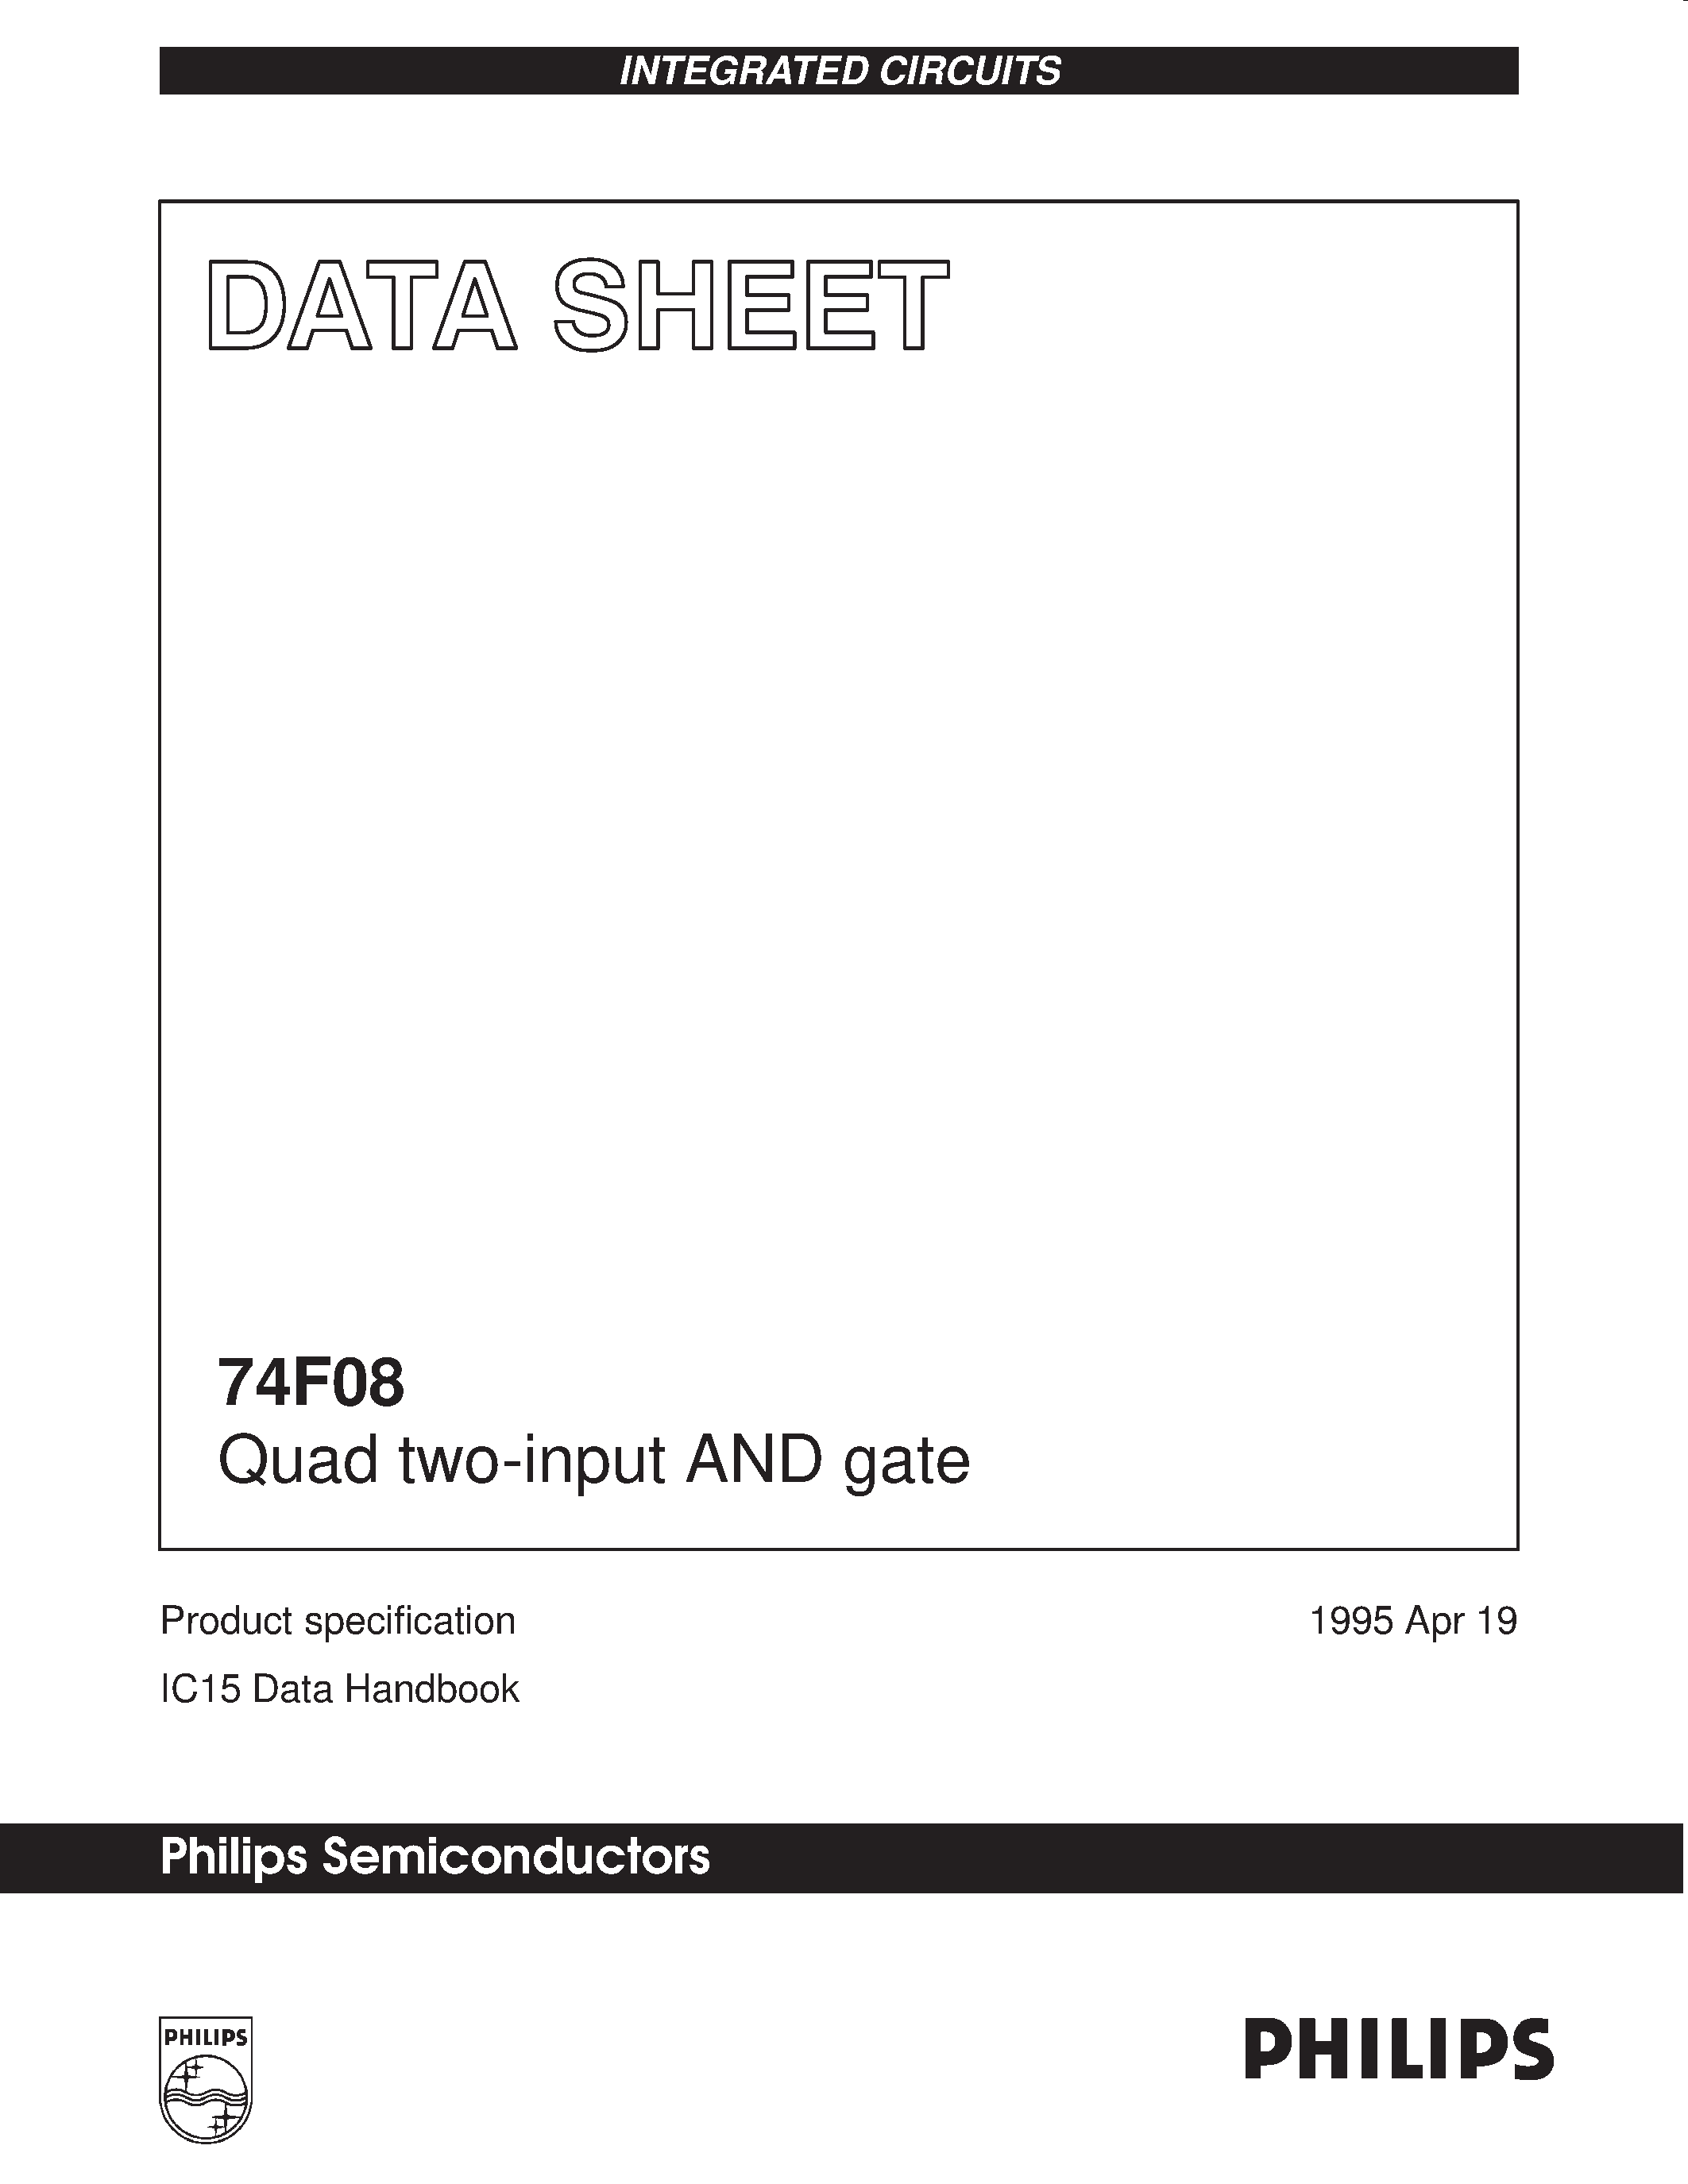 Datasheet 74F08 - Quad two-input AND gate page 1